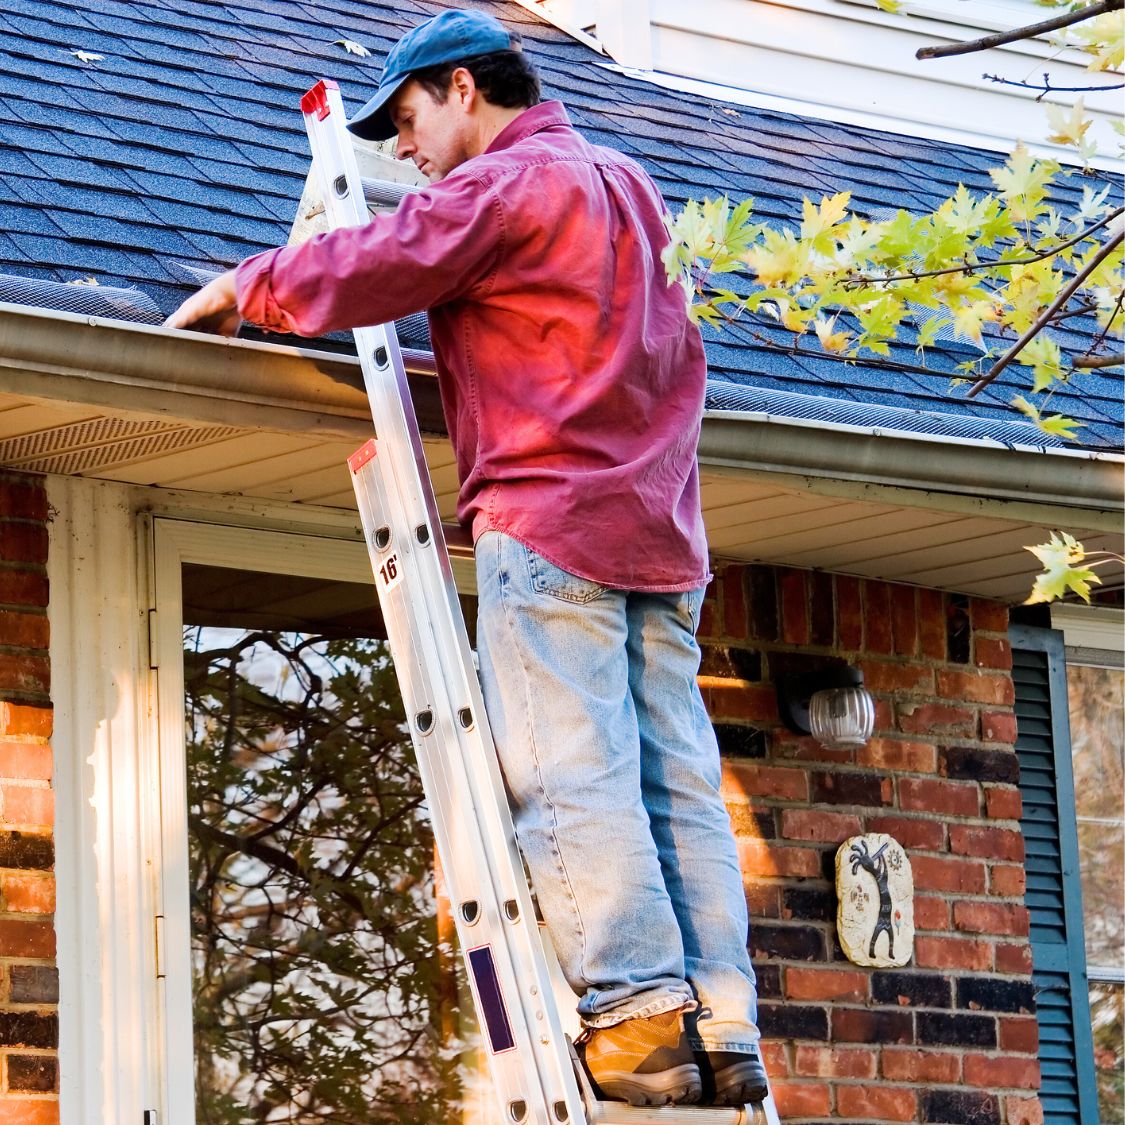 6 Tips To Spruce Up Your Roof in the Spring